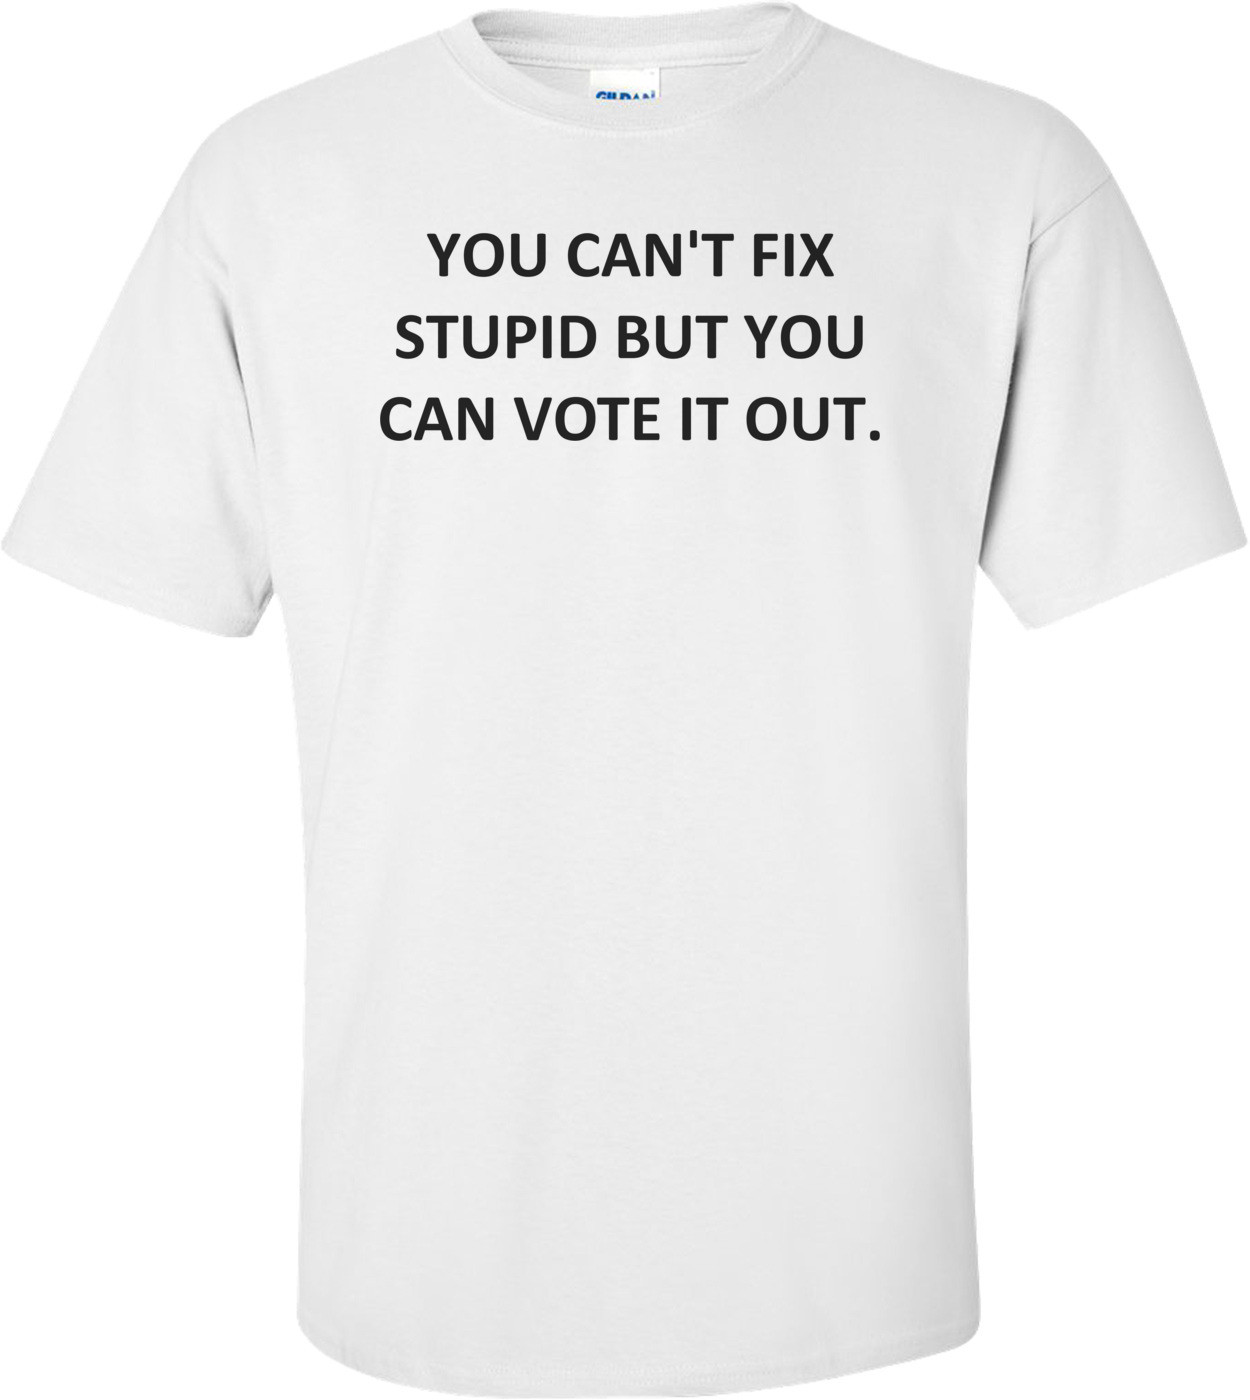 YOU CAN'T FIX STUPID BUT YOU CAN VOTE IT OUT.